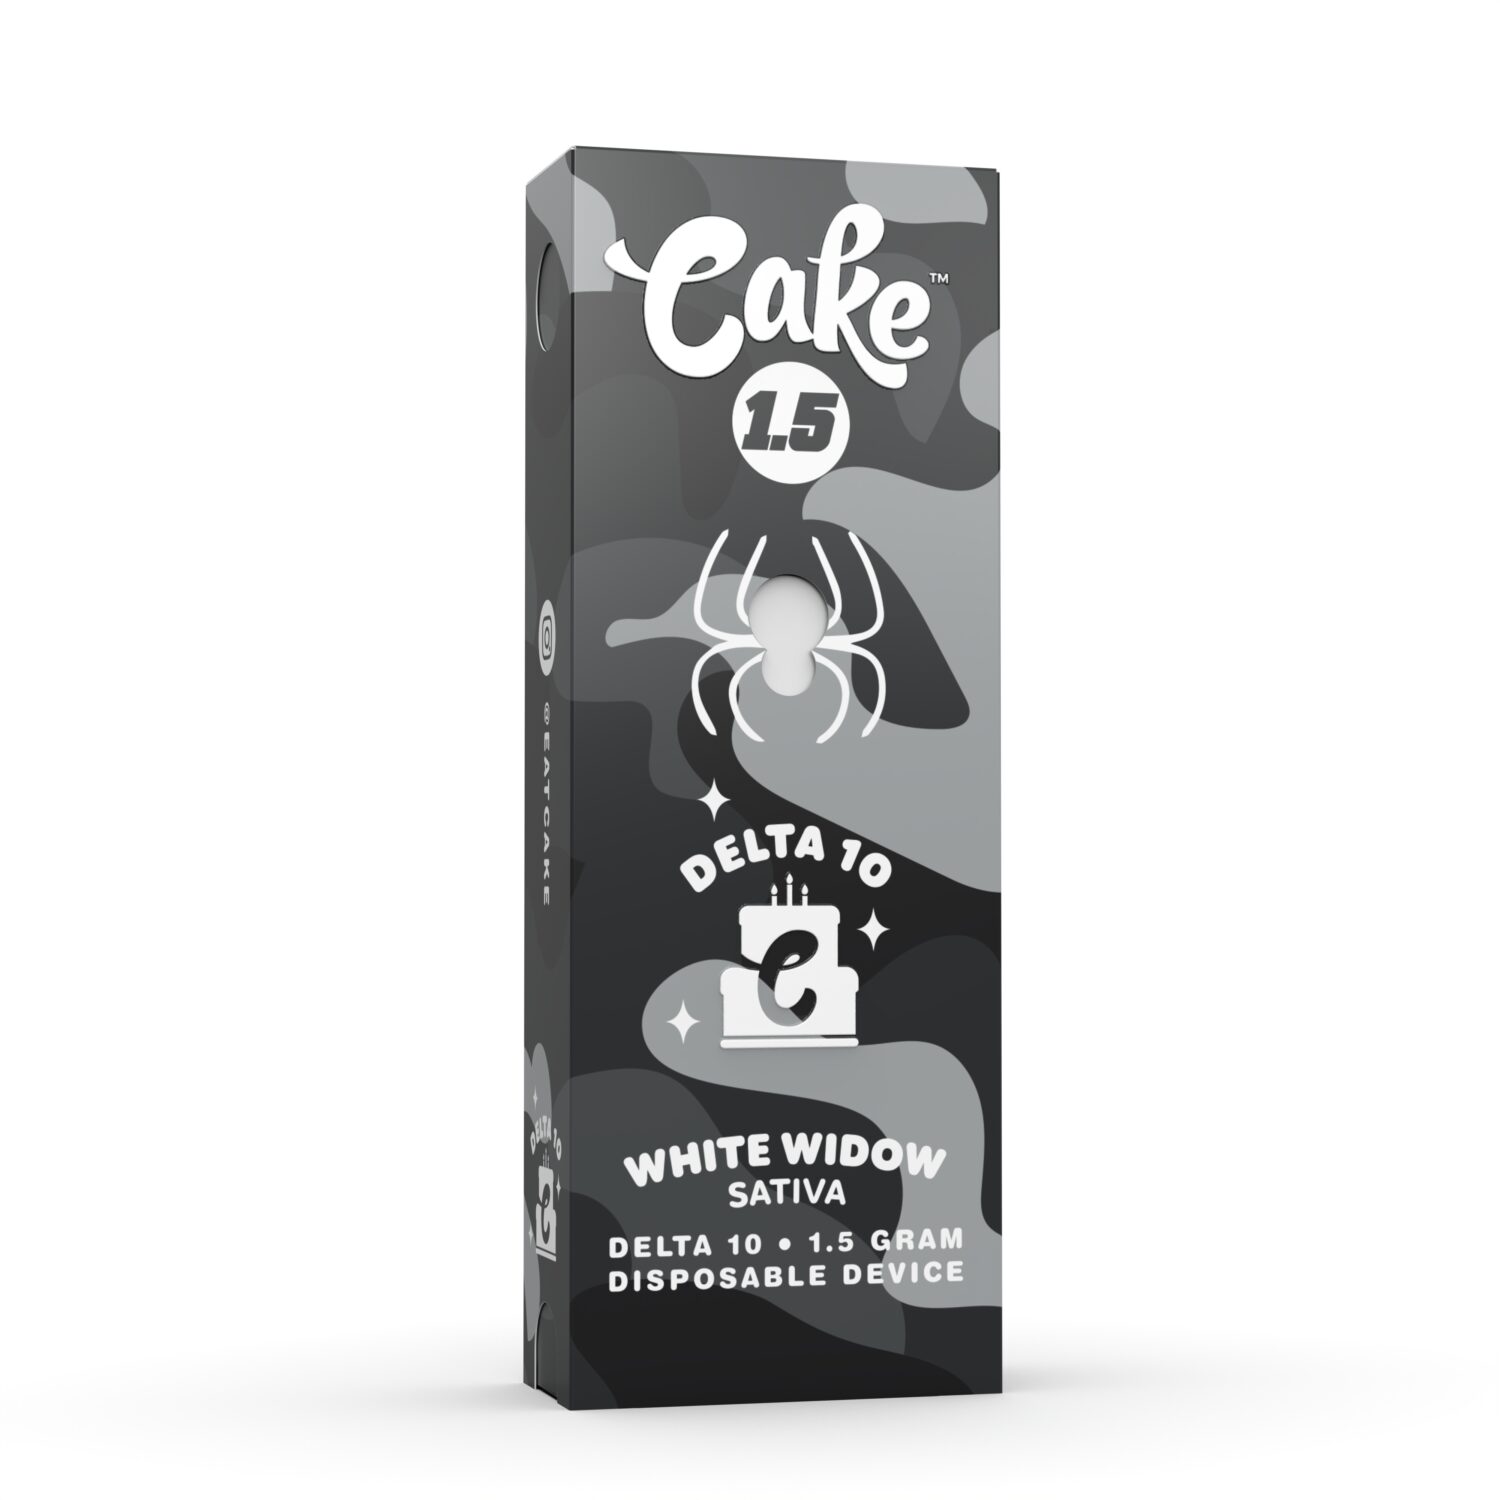 Cake-Delta-10-Disposable-1.5g-White-Widow-scaled-1.jpg